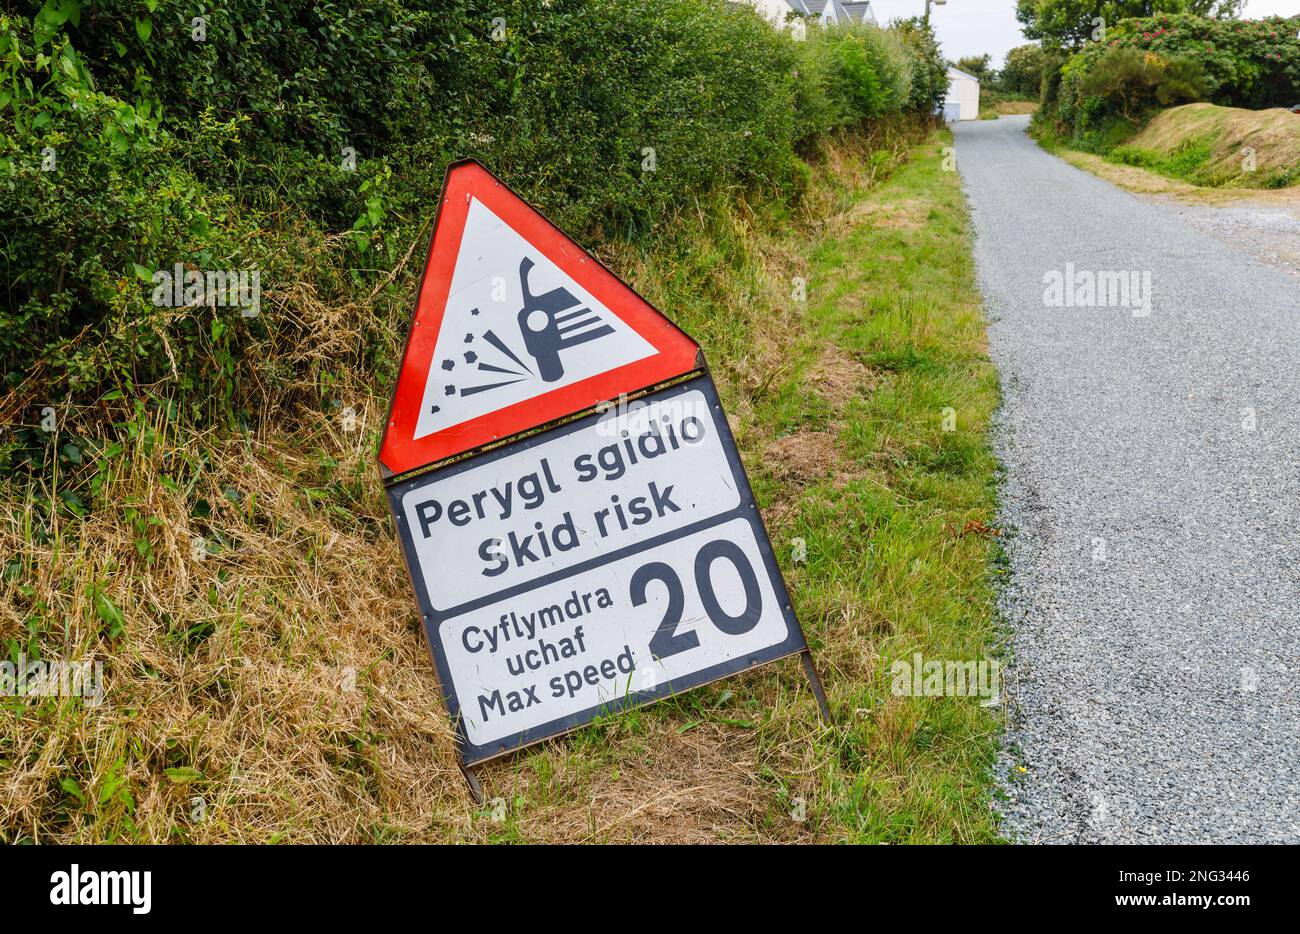 Loose chippings skid risk road sign in Marloes, a small village on the Marloes Peninsula in the Pembrokeshire Coast National Park, west Wales Stock Photo